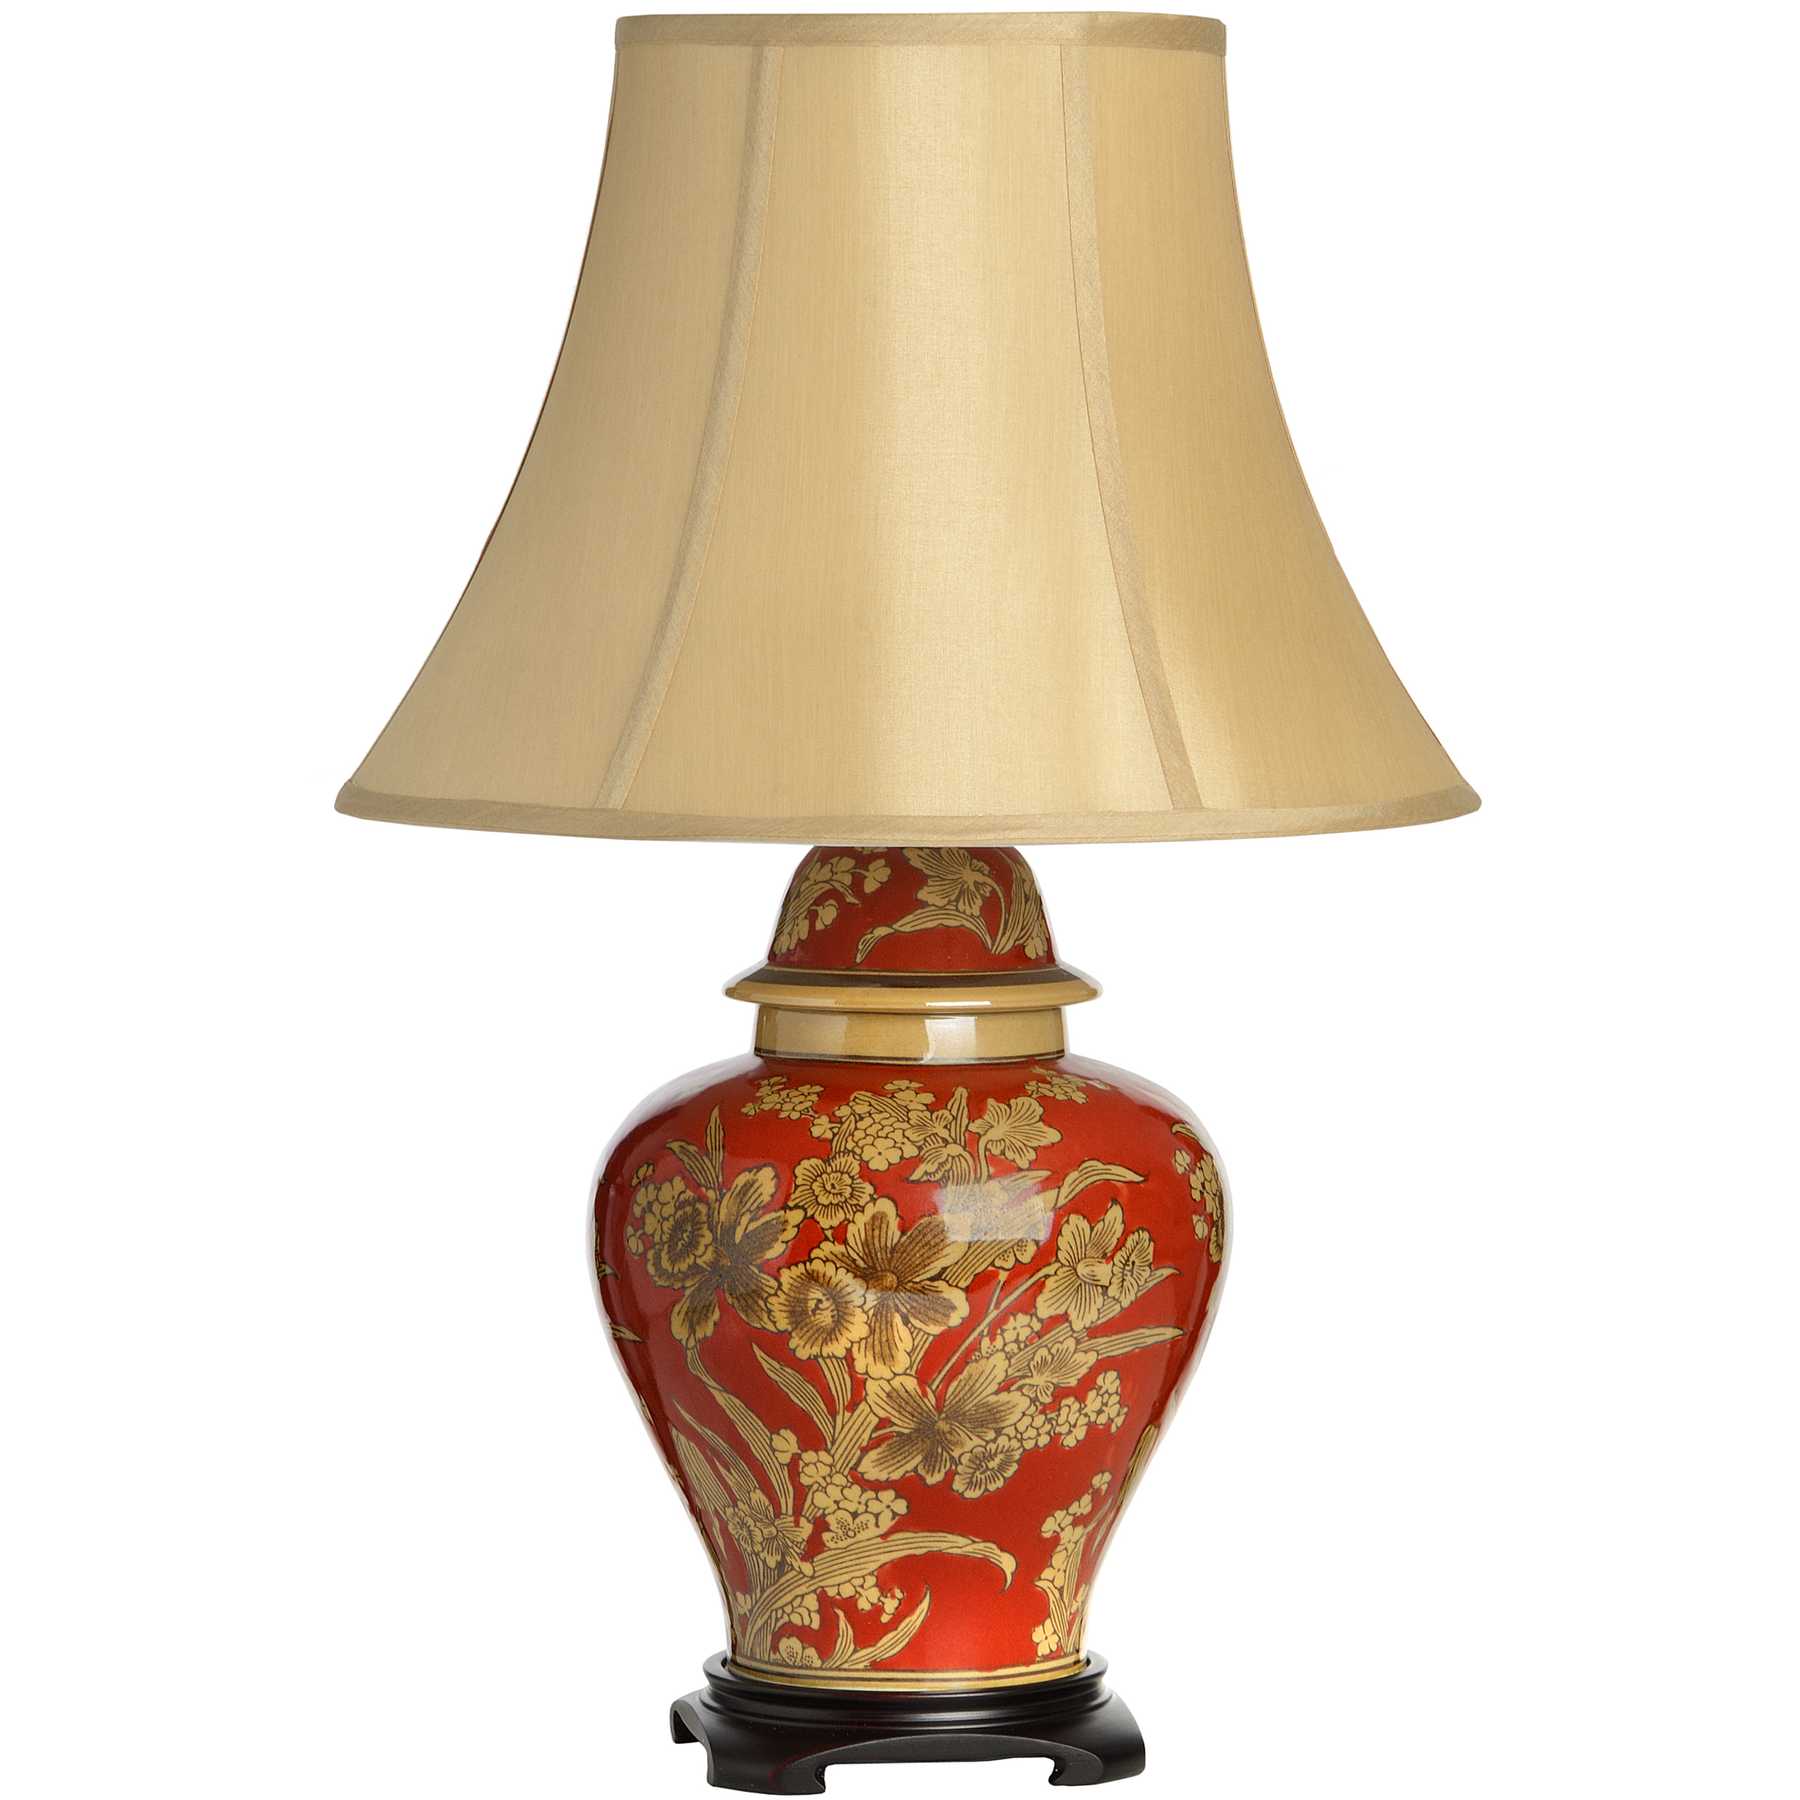 Chinese Table Lamps A Touch Of The, Chinese Table Lamps Australia